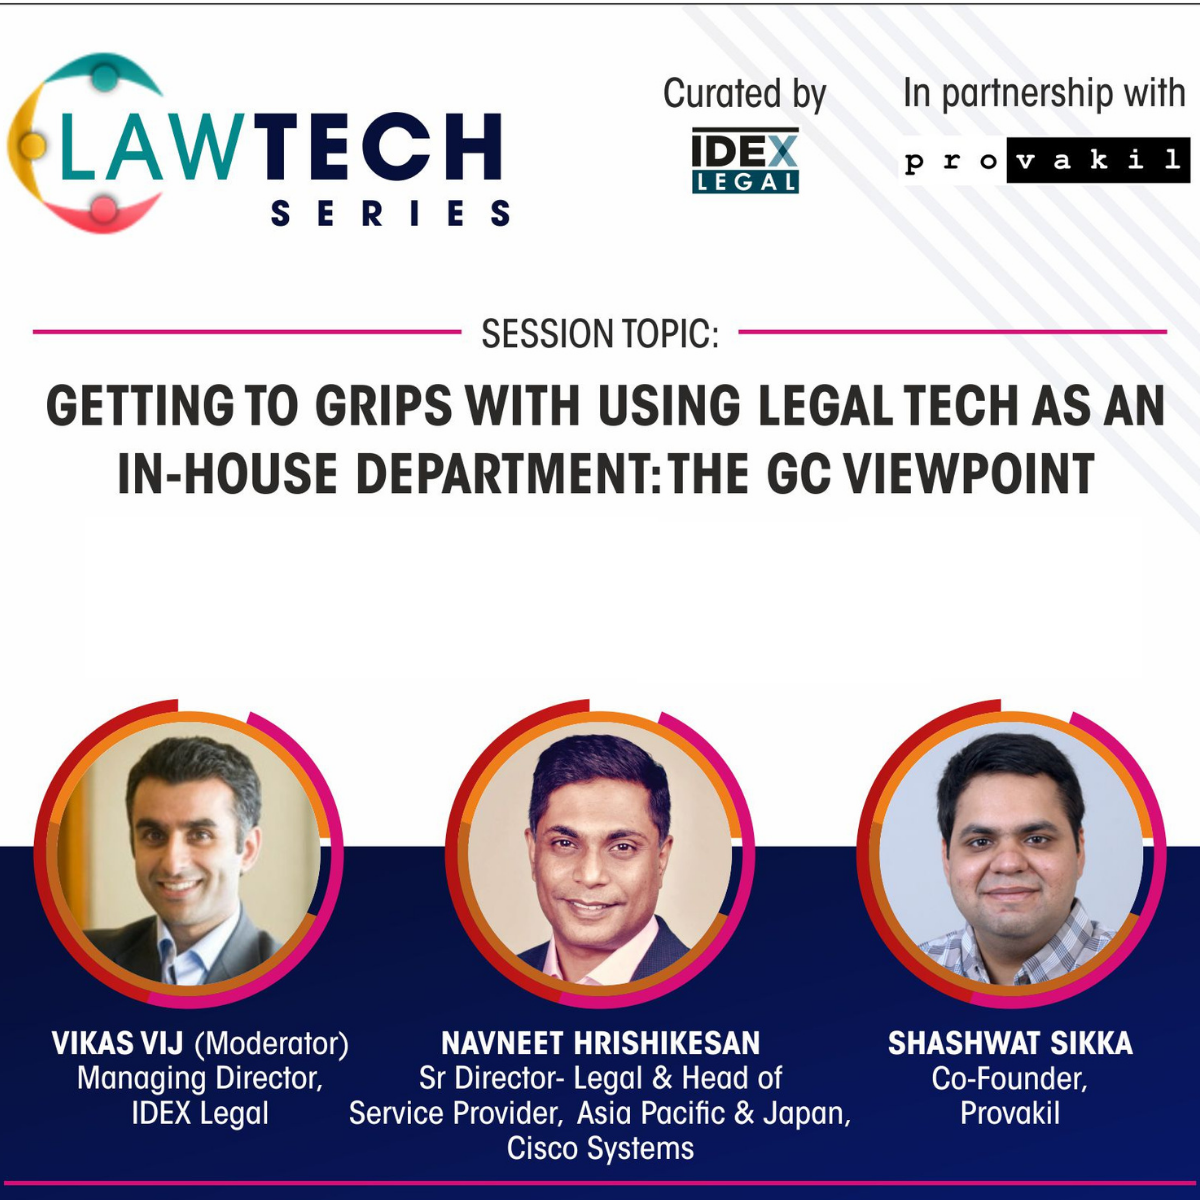 Getting To Grips With Using Legal Technology: The GC Viewpoint